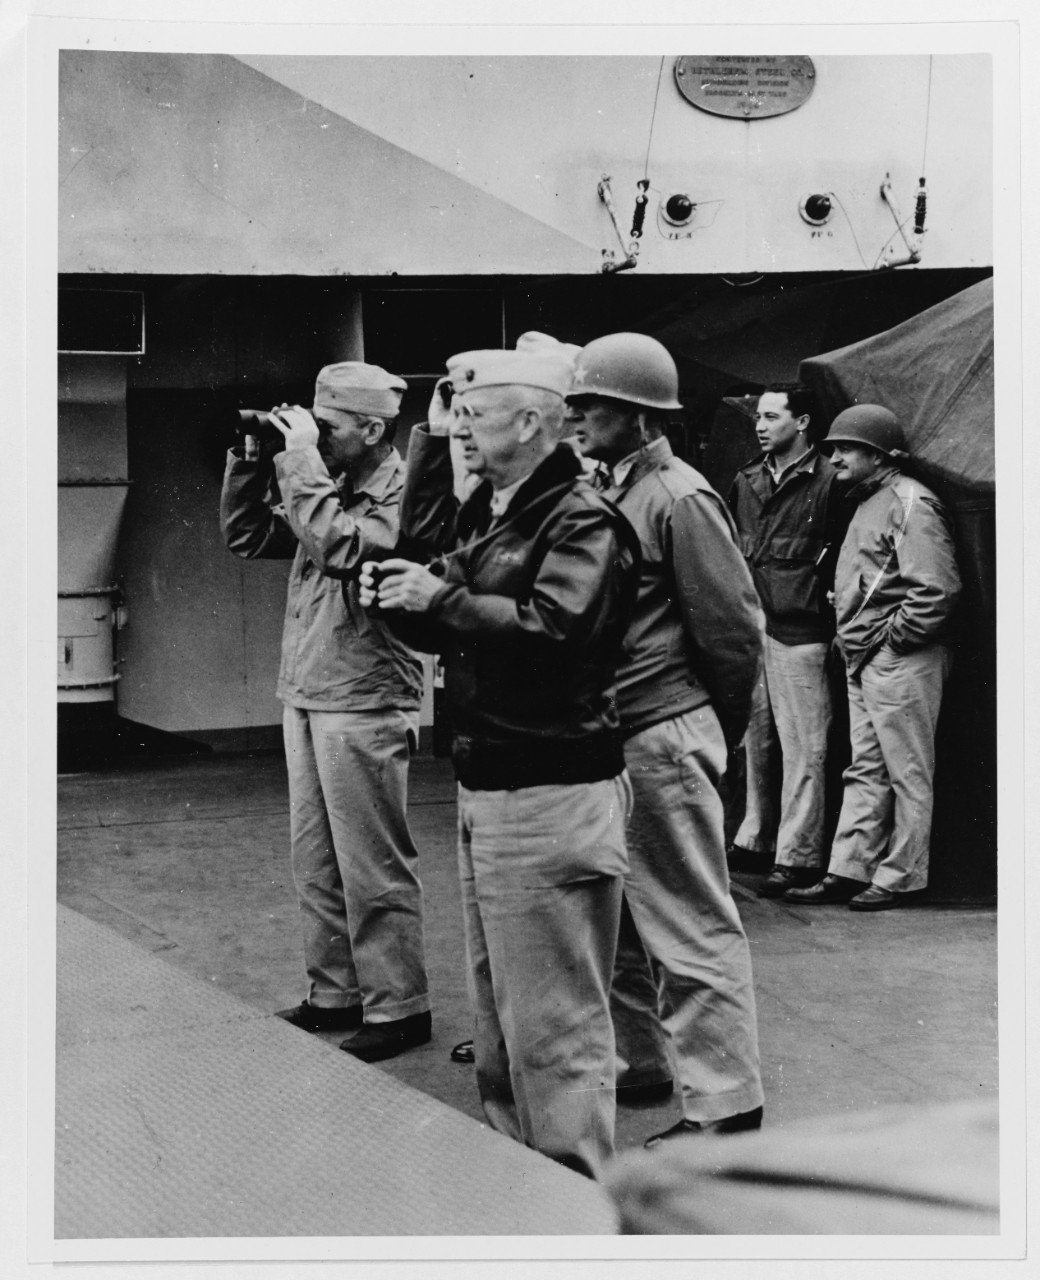 Secretary of the Navy James Forrestal and operation leaders watch invasion activities from on board USS Eldorado (AGC-11), 20 February 1945.